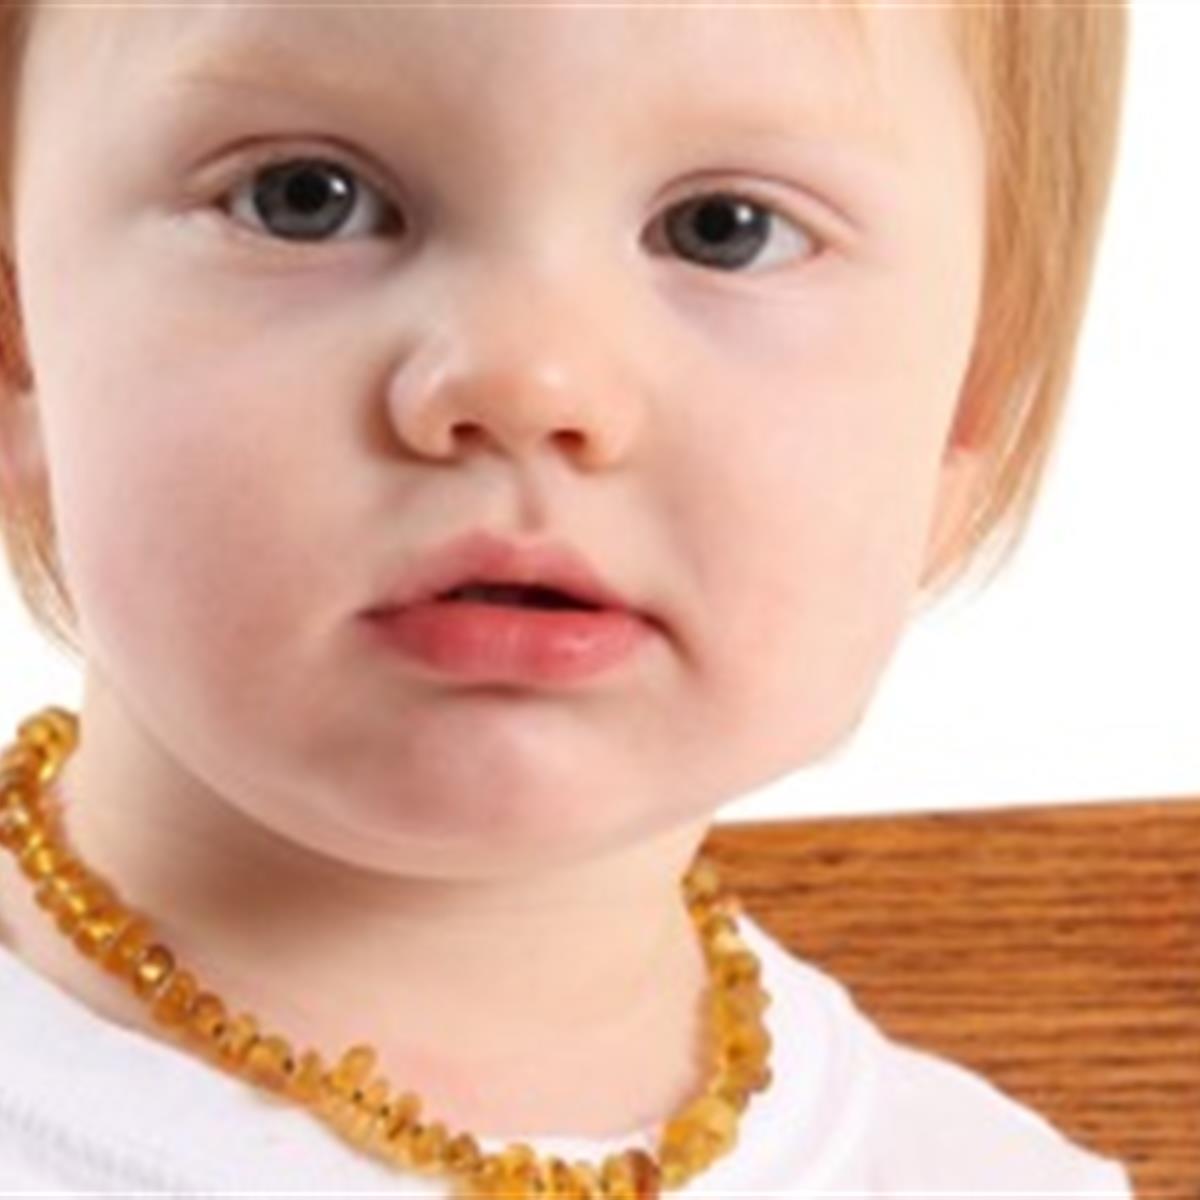 Beads to commemorate big moments in tiny babies' lives - WHYY